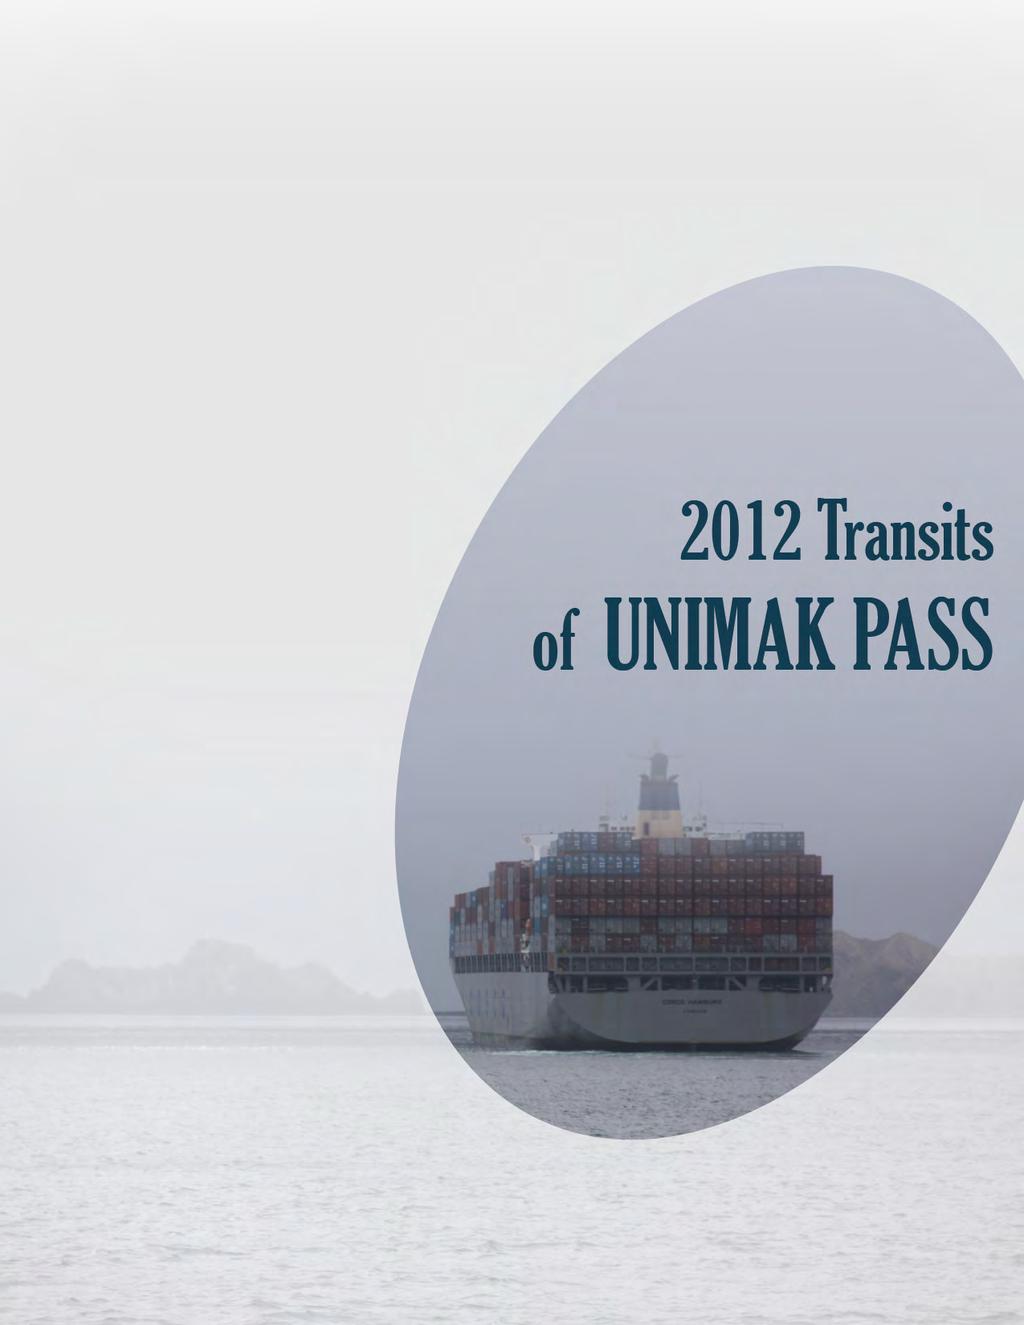 2012 Transits of Unimak Pass AUTHORS Nuka Research and Planning Group, LLC TABLE OF CONTENTS Executive Summary... 2 Overview... 3 1. Introduction... 5 1.